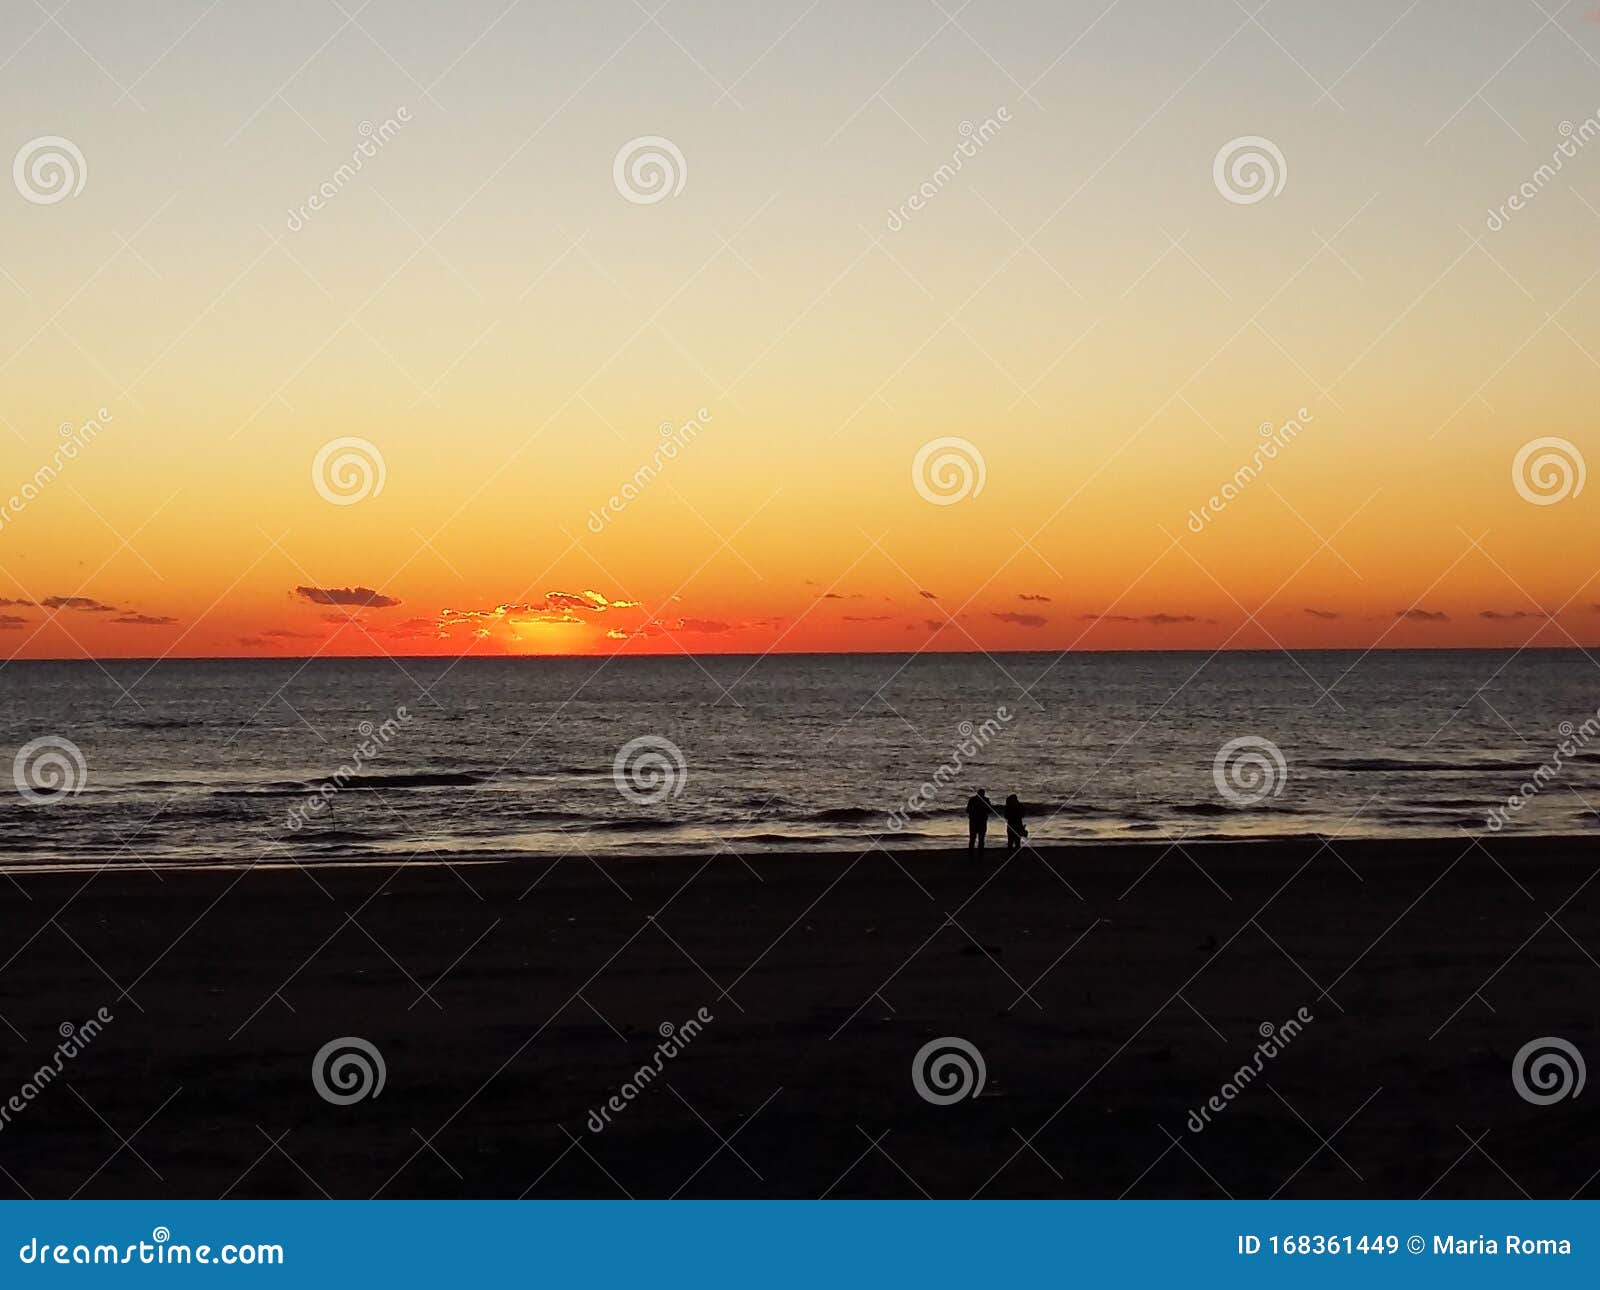 Candy sunset on the sea stock image. Image of beach - 168361449